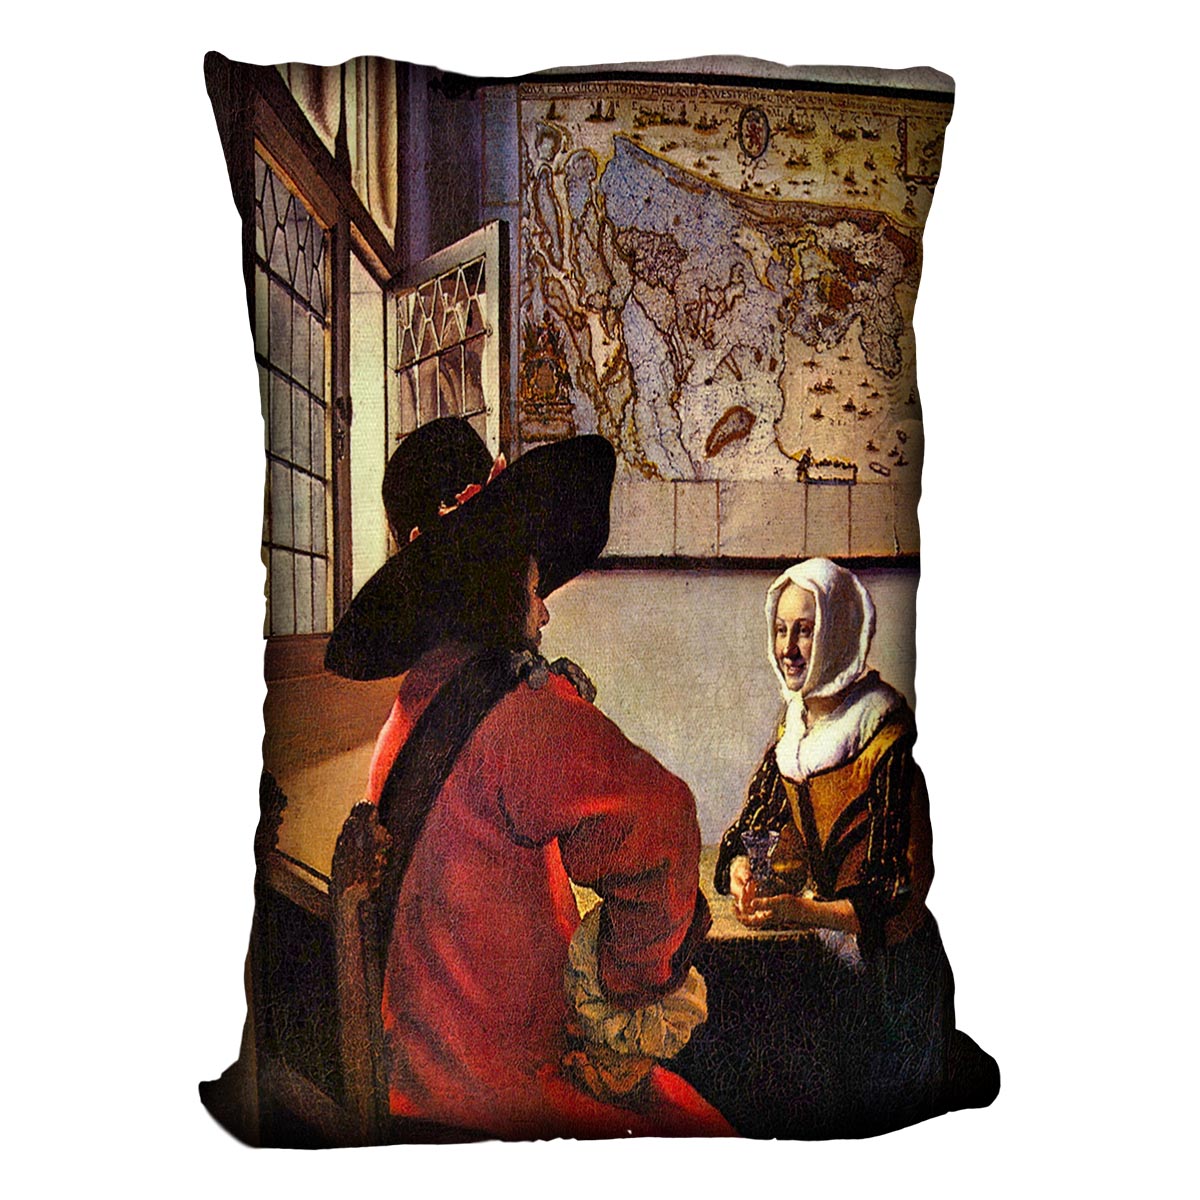 Soldier and girl smiling by Vermeer Cushion